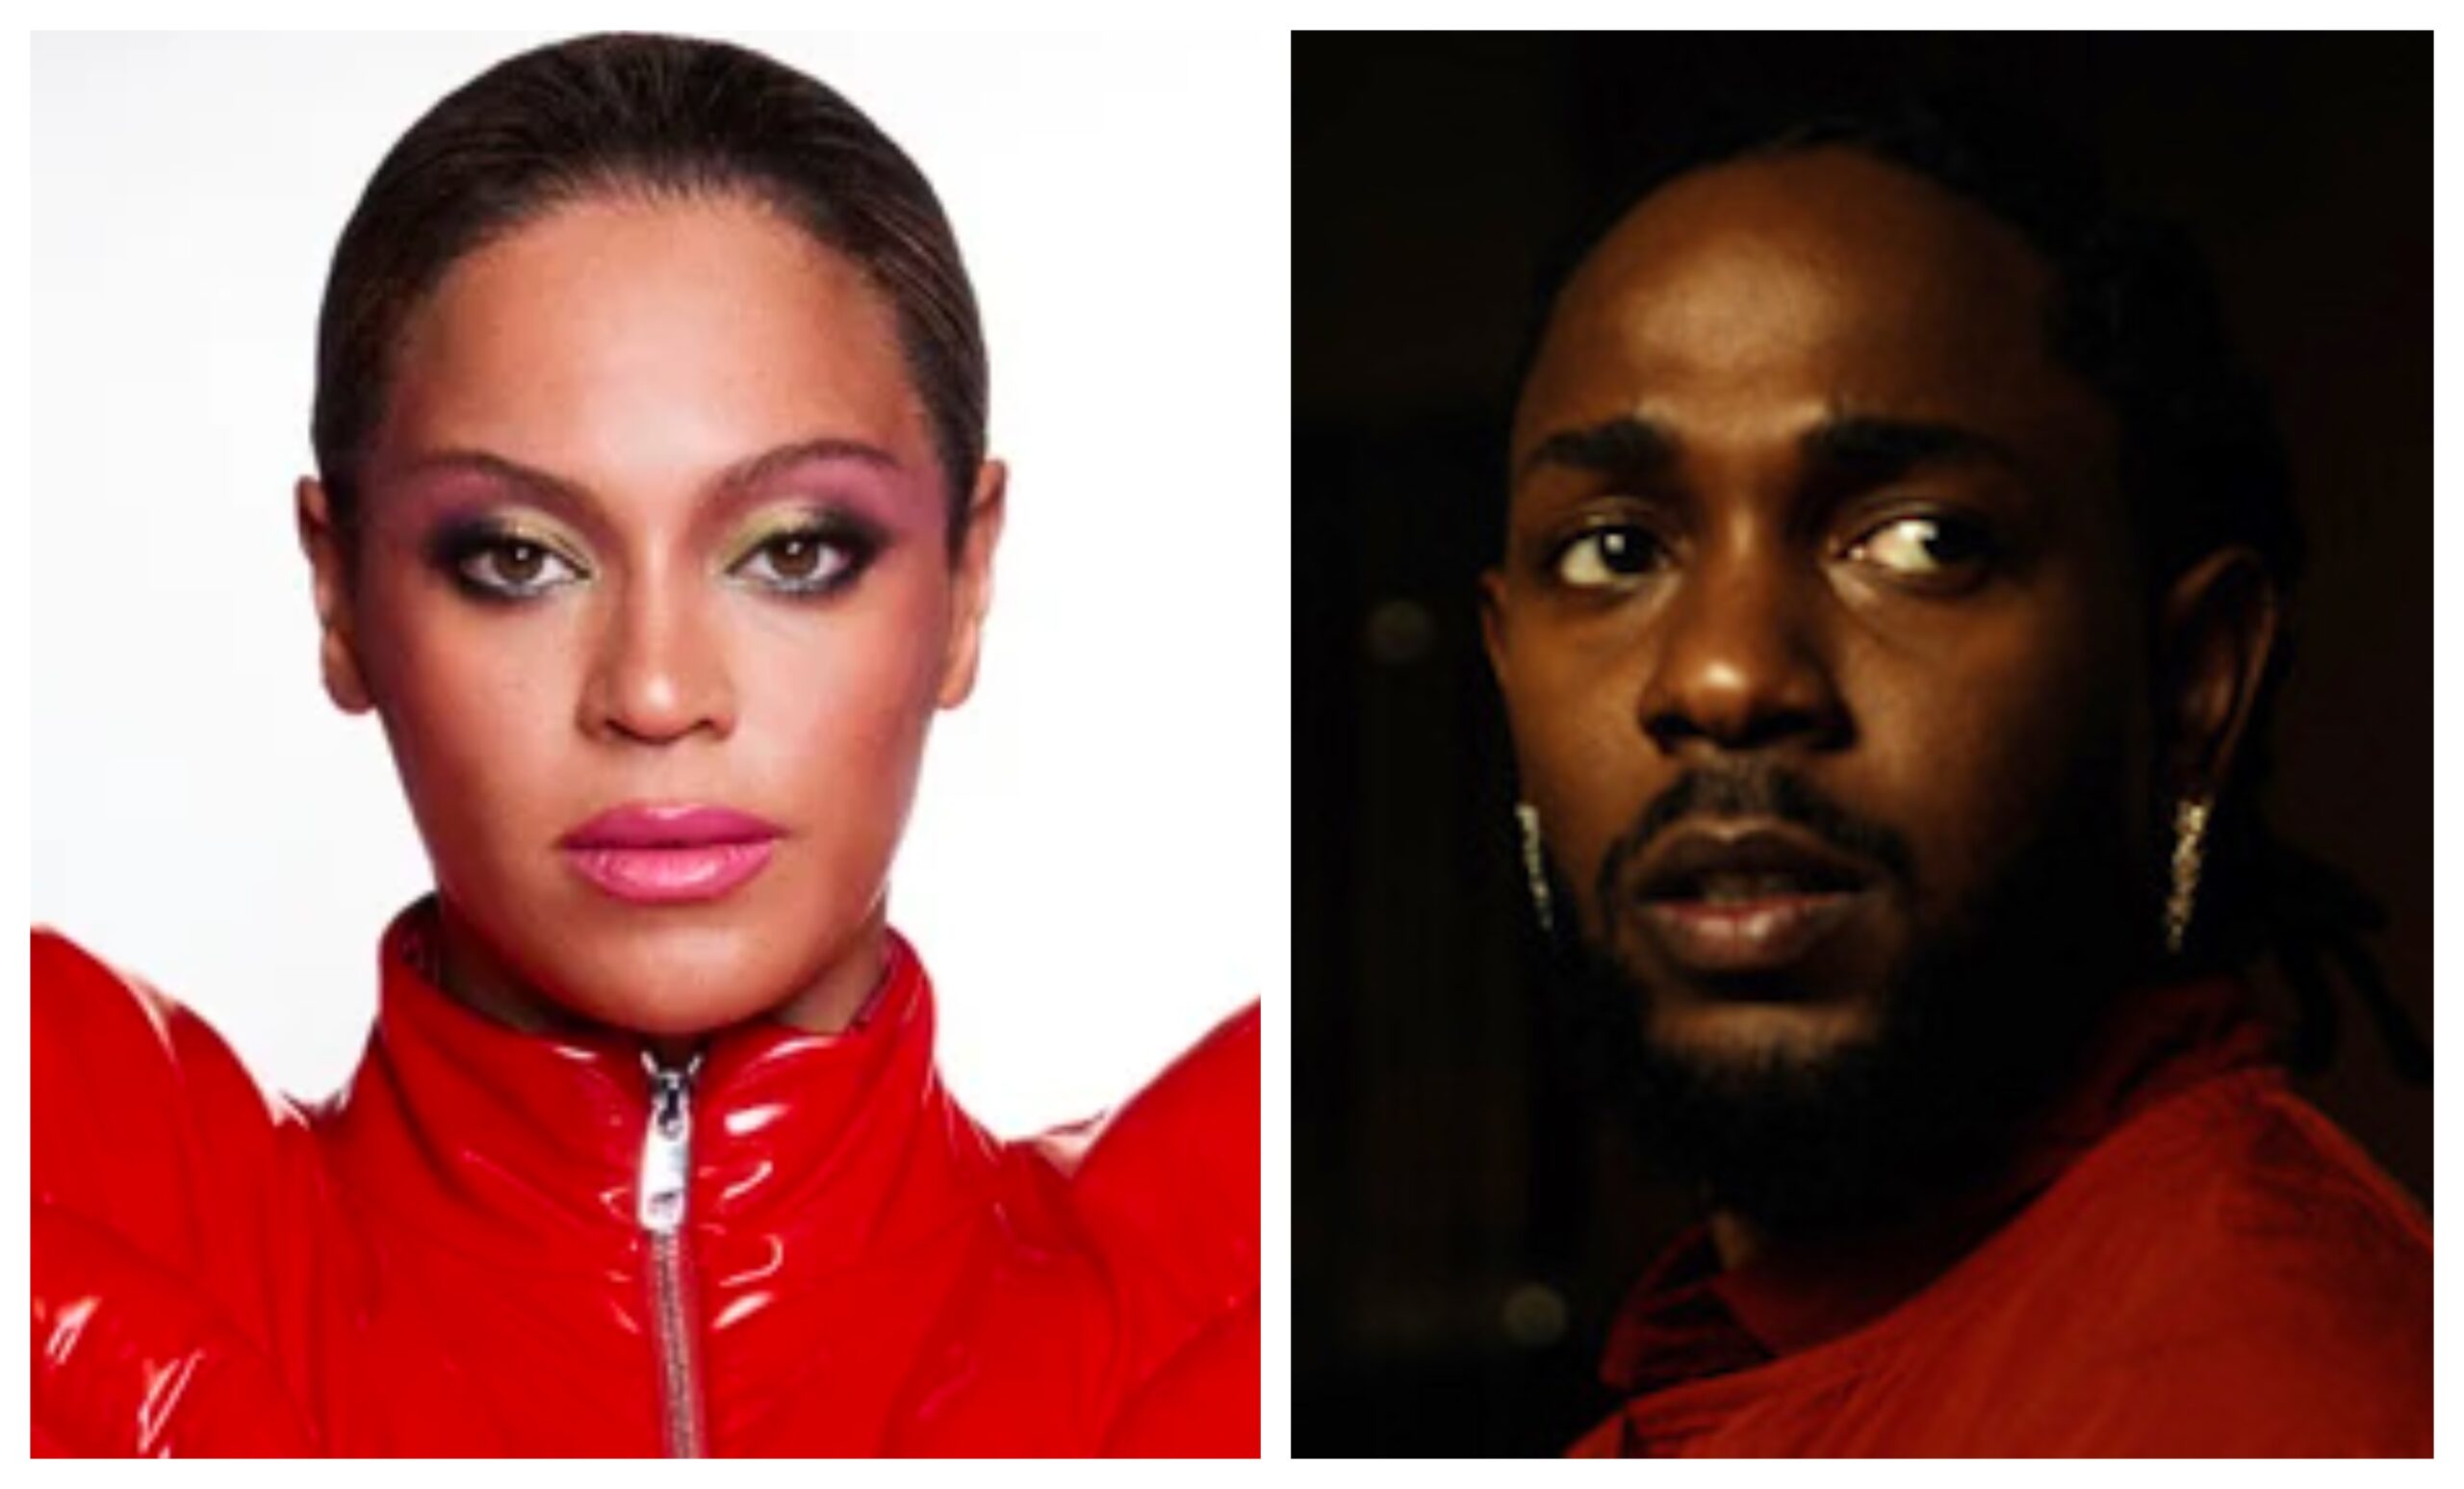 Hot 100 Beyonce And Kendrick Lamar Make Rocket Fuelled Return With America Has A Problem Remix